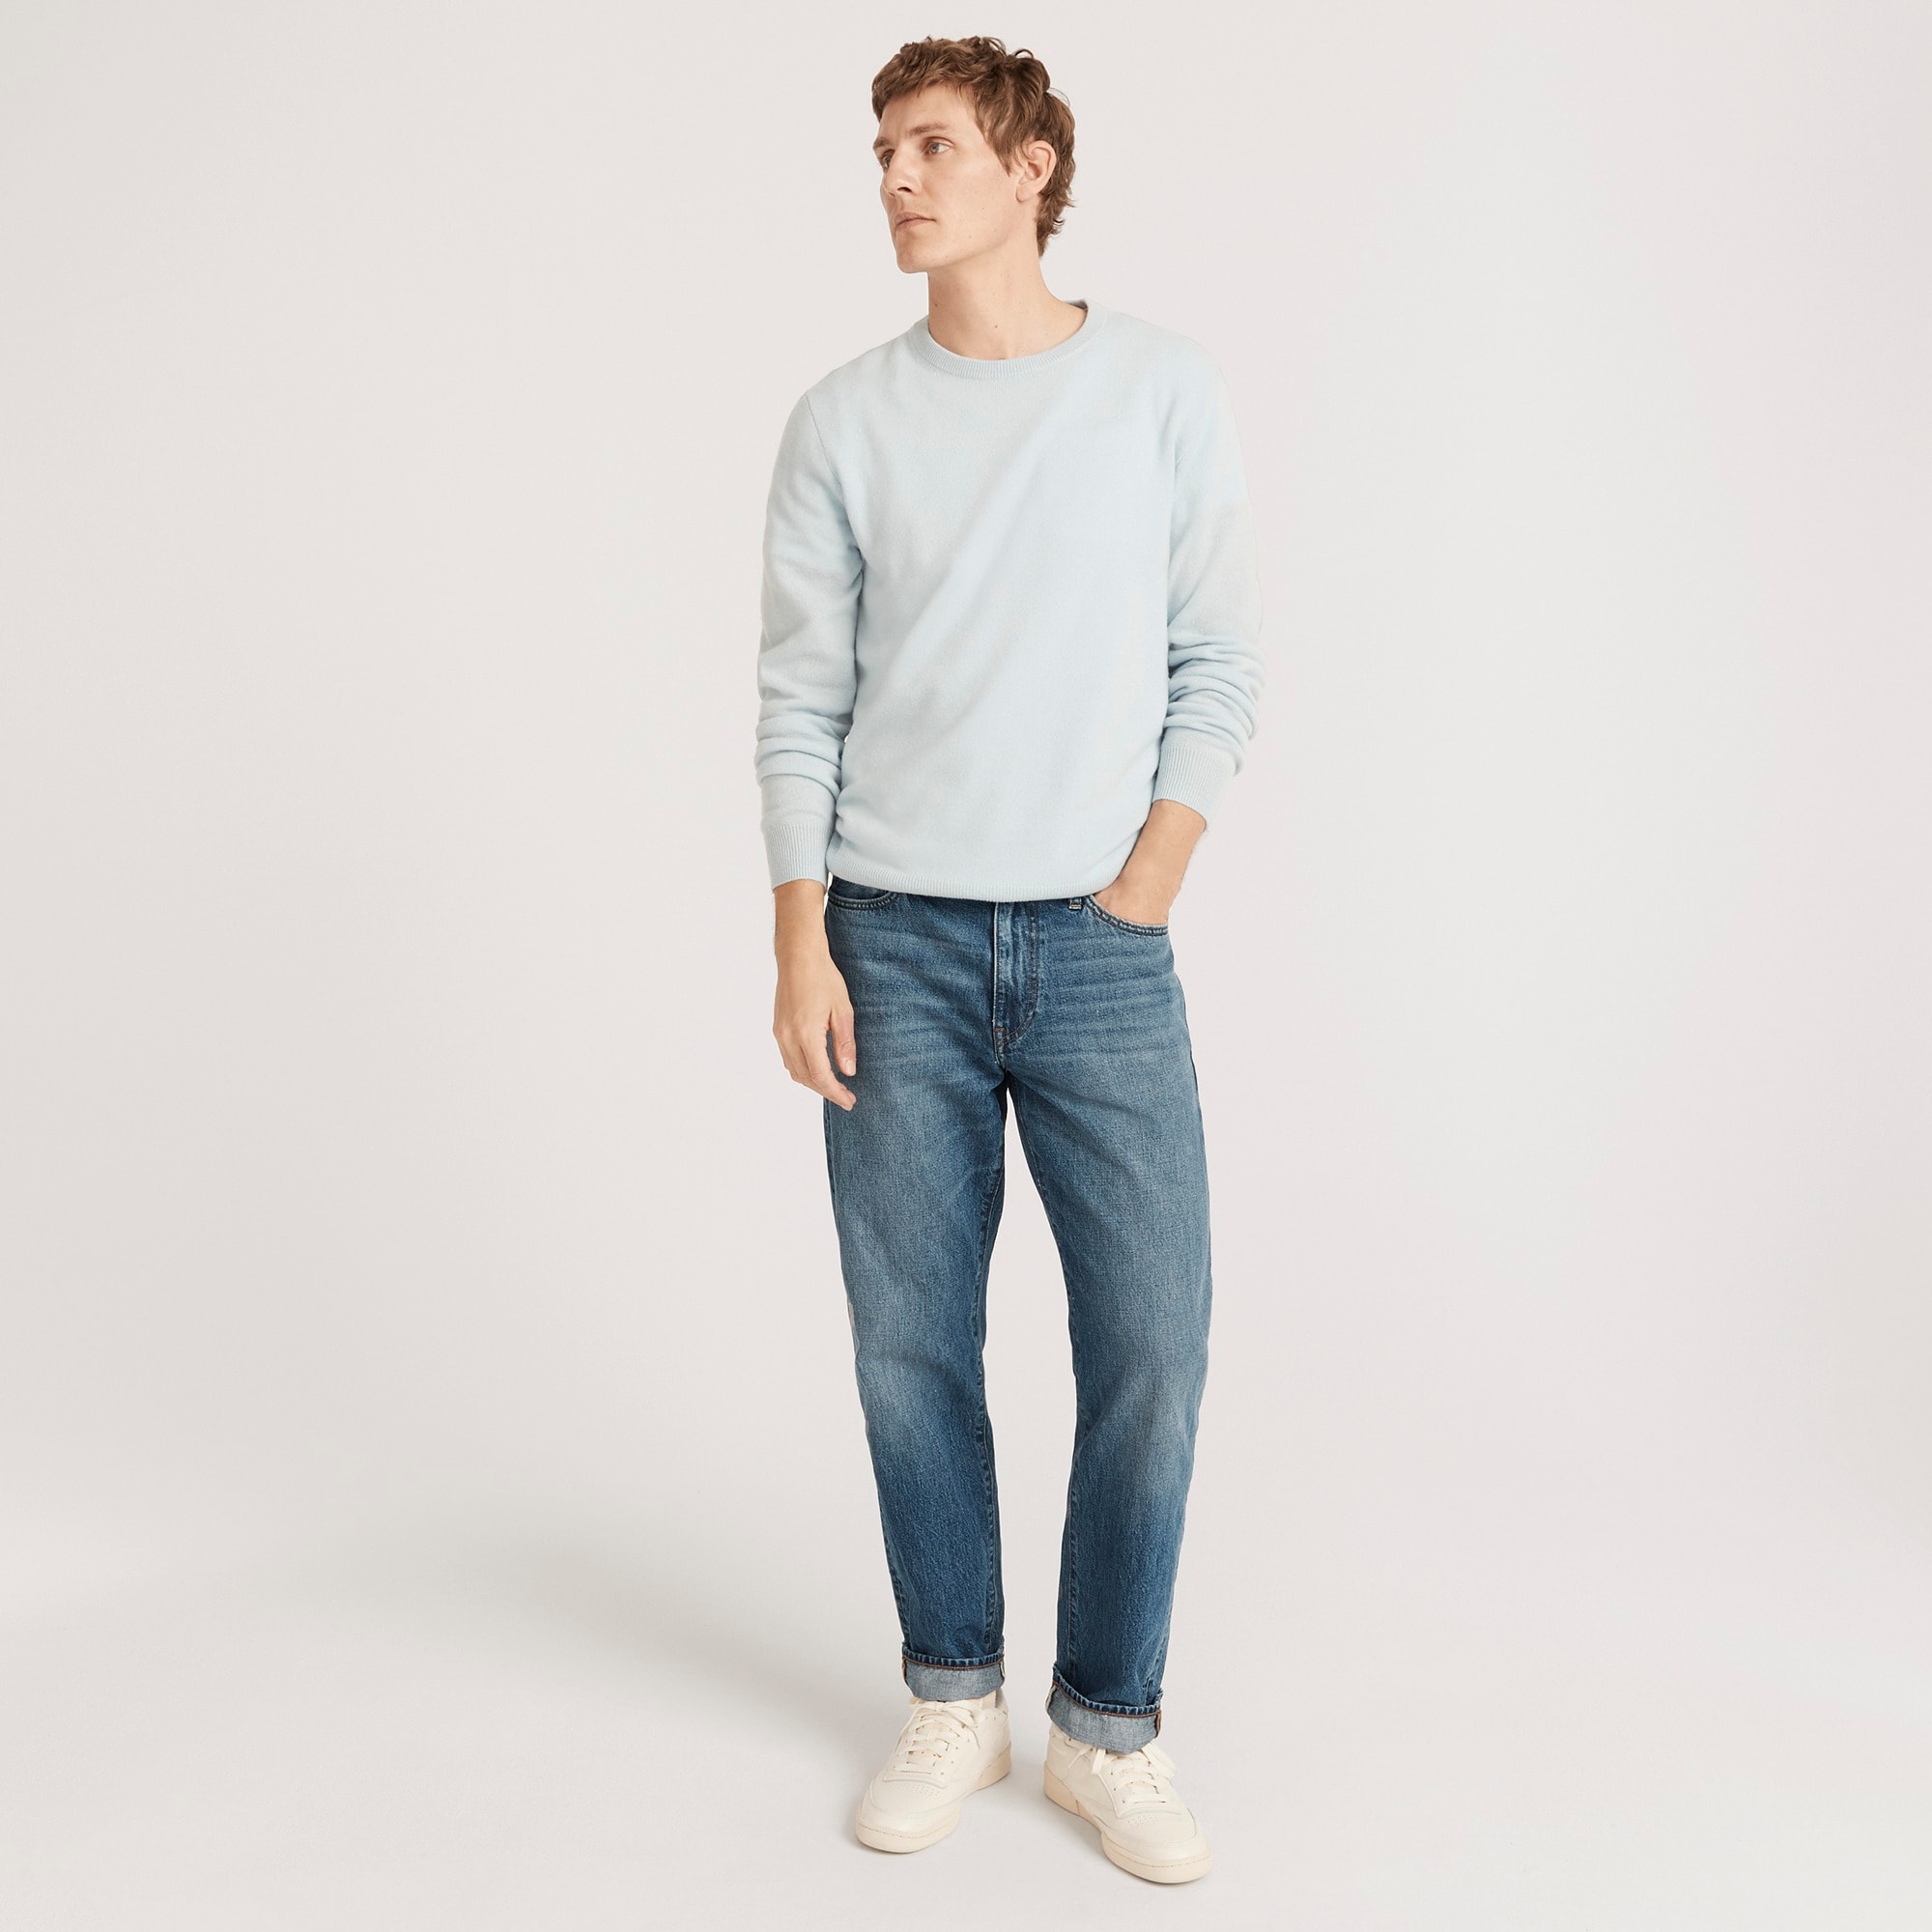 Jcrew Classic Relaxed-fit jean in two-year wash